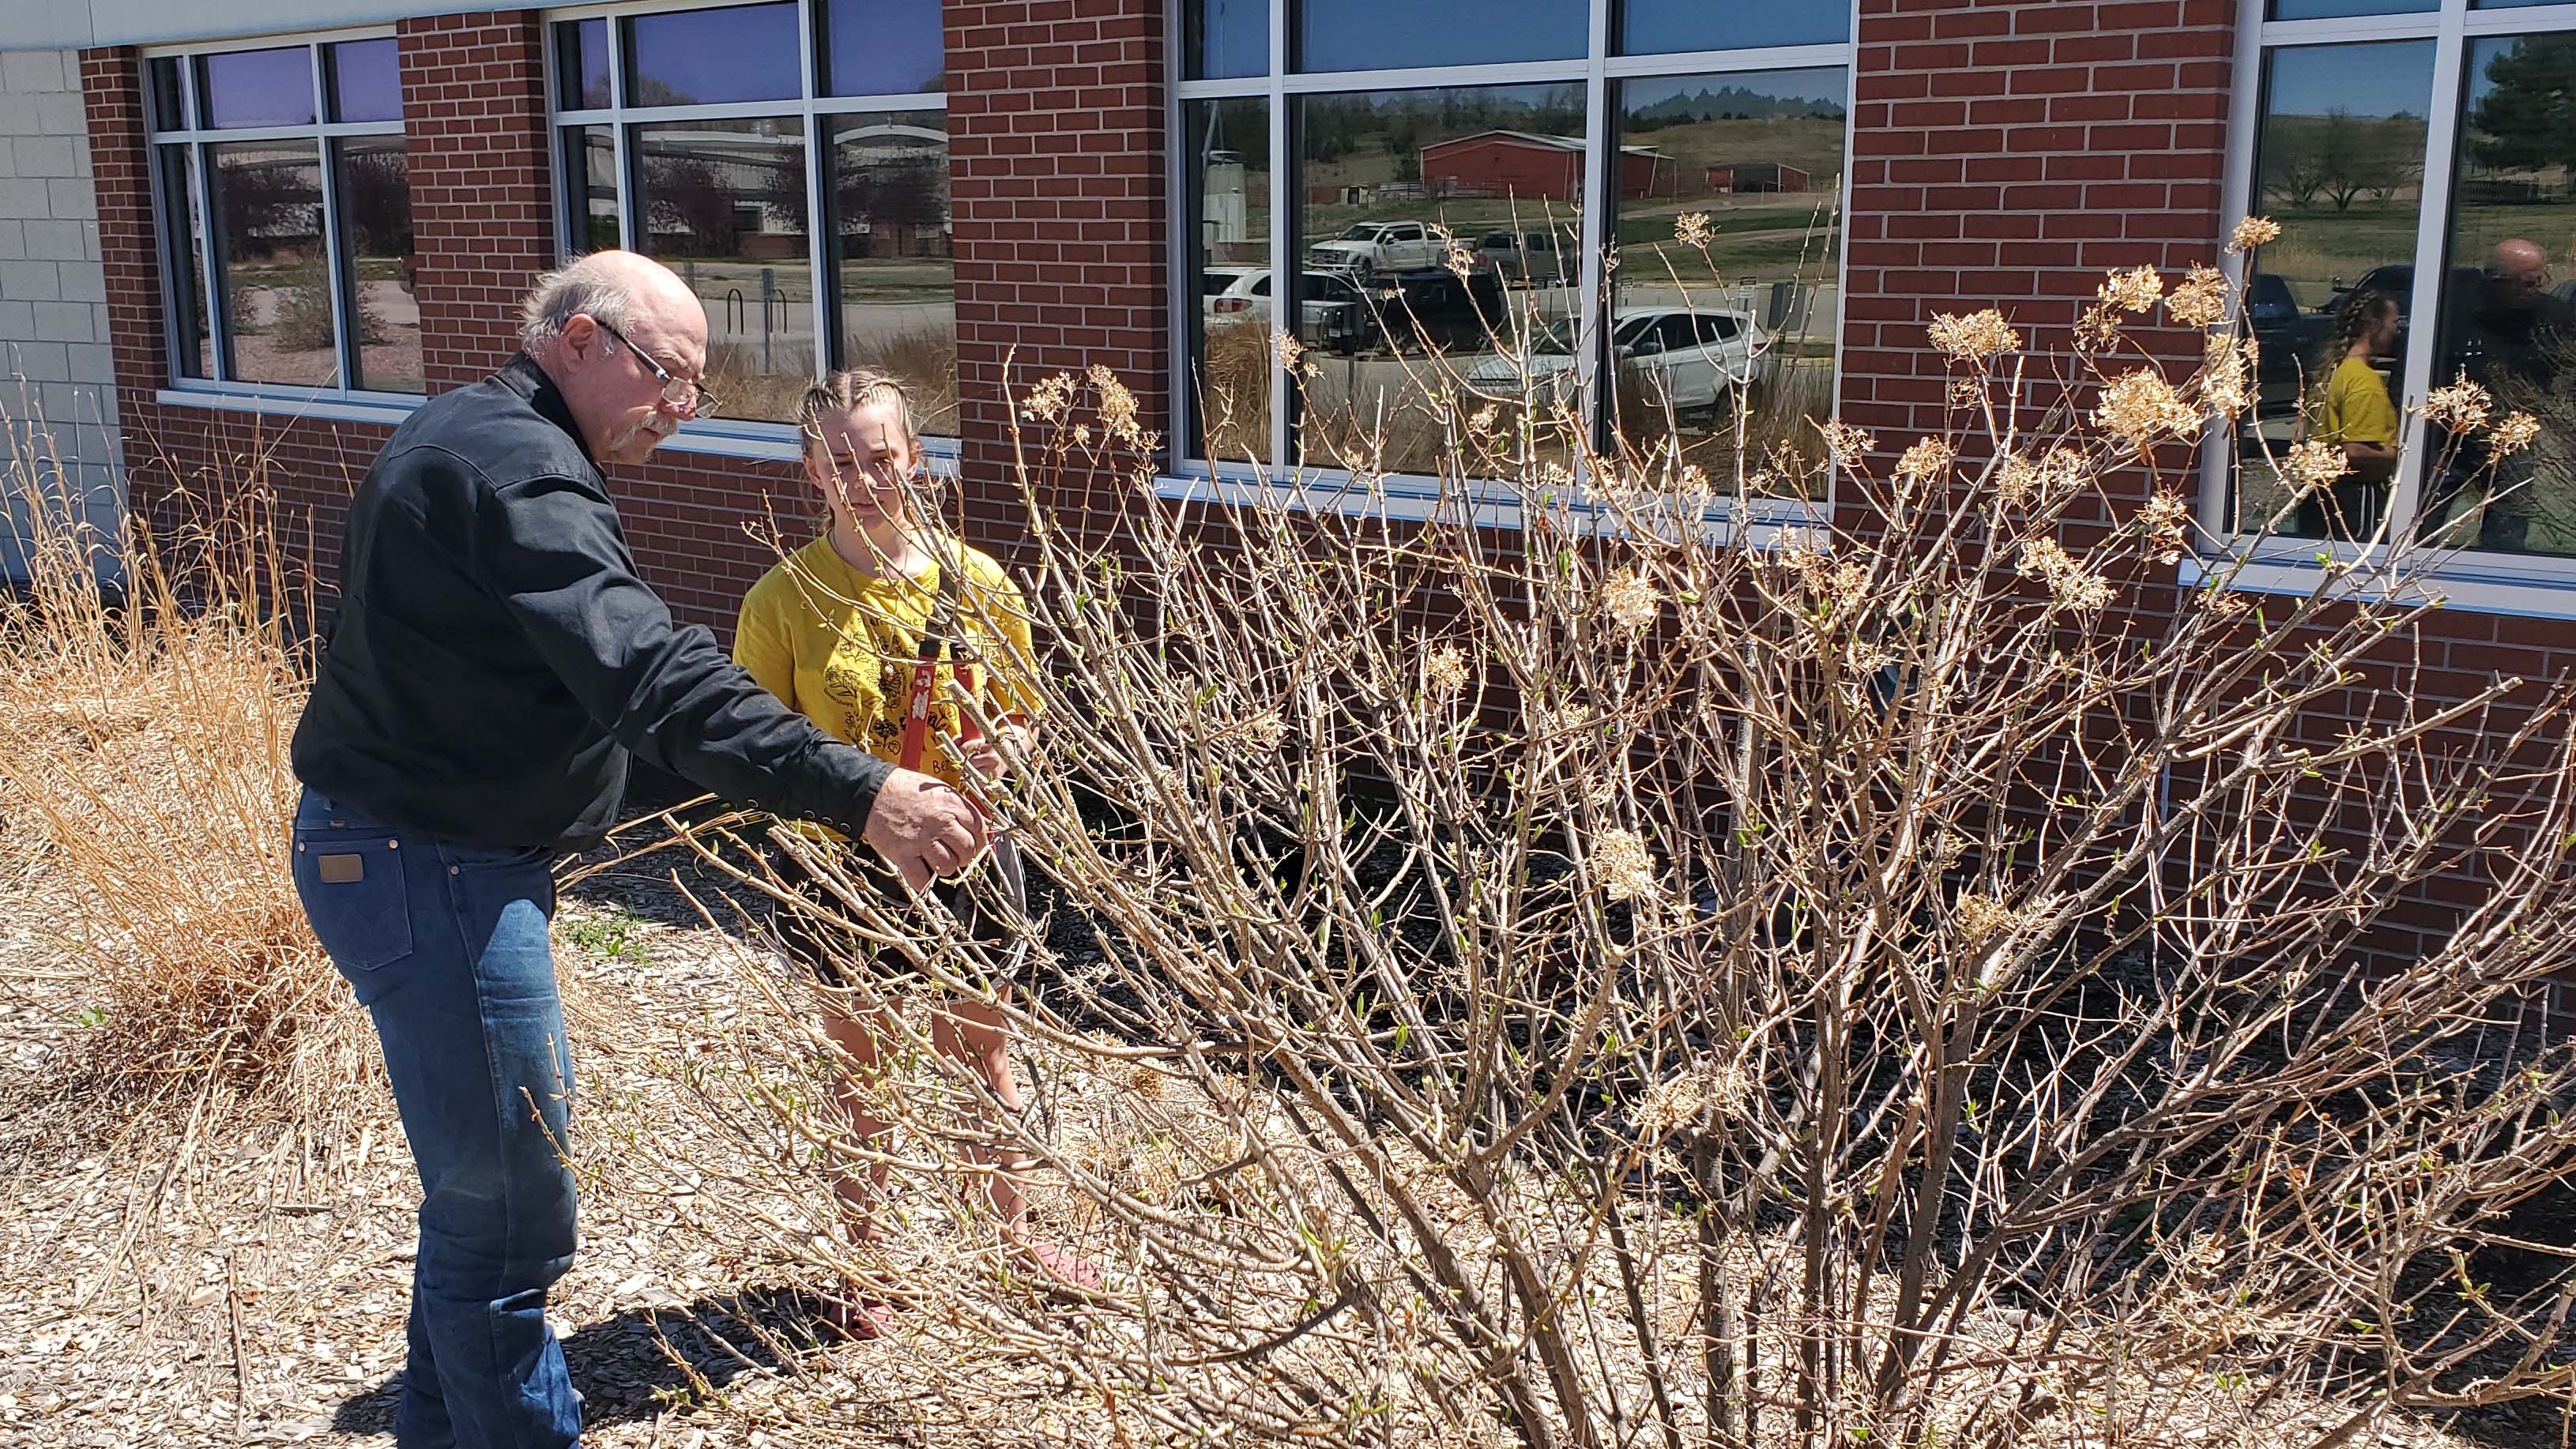 Elie Madsen, a freshman Veterinary Technology student from Maxwell, trims a shrub at the Nebraska College of Technical Agriculture on Thursday.  Elie, president of the Horticulture Club, visits with NCTA Instructor Dan Stehlik about pruning techniques. (Crawford / NCTA News photo)  